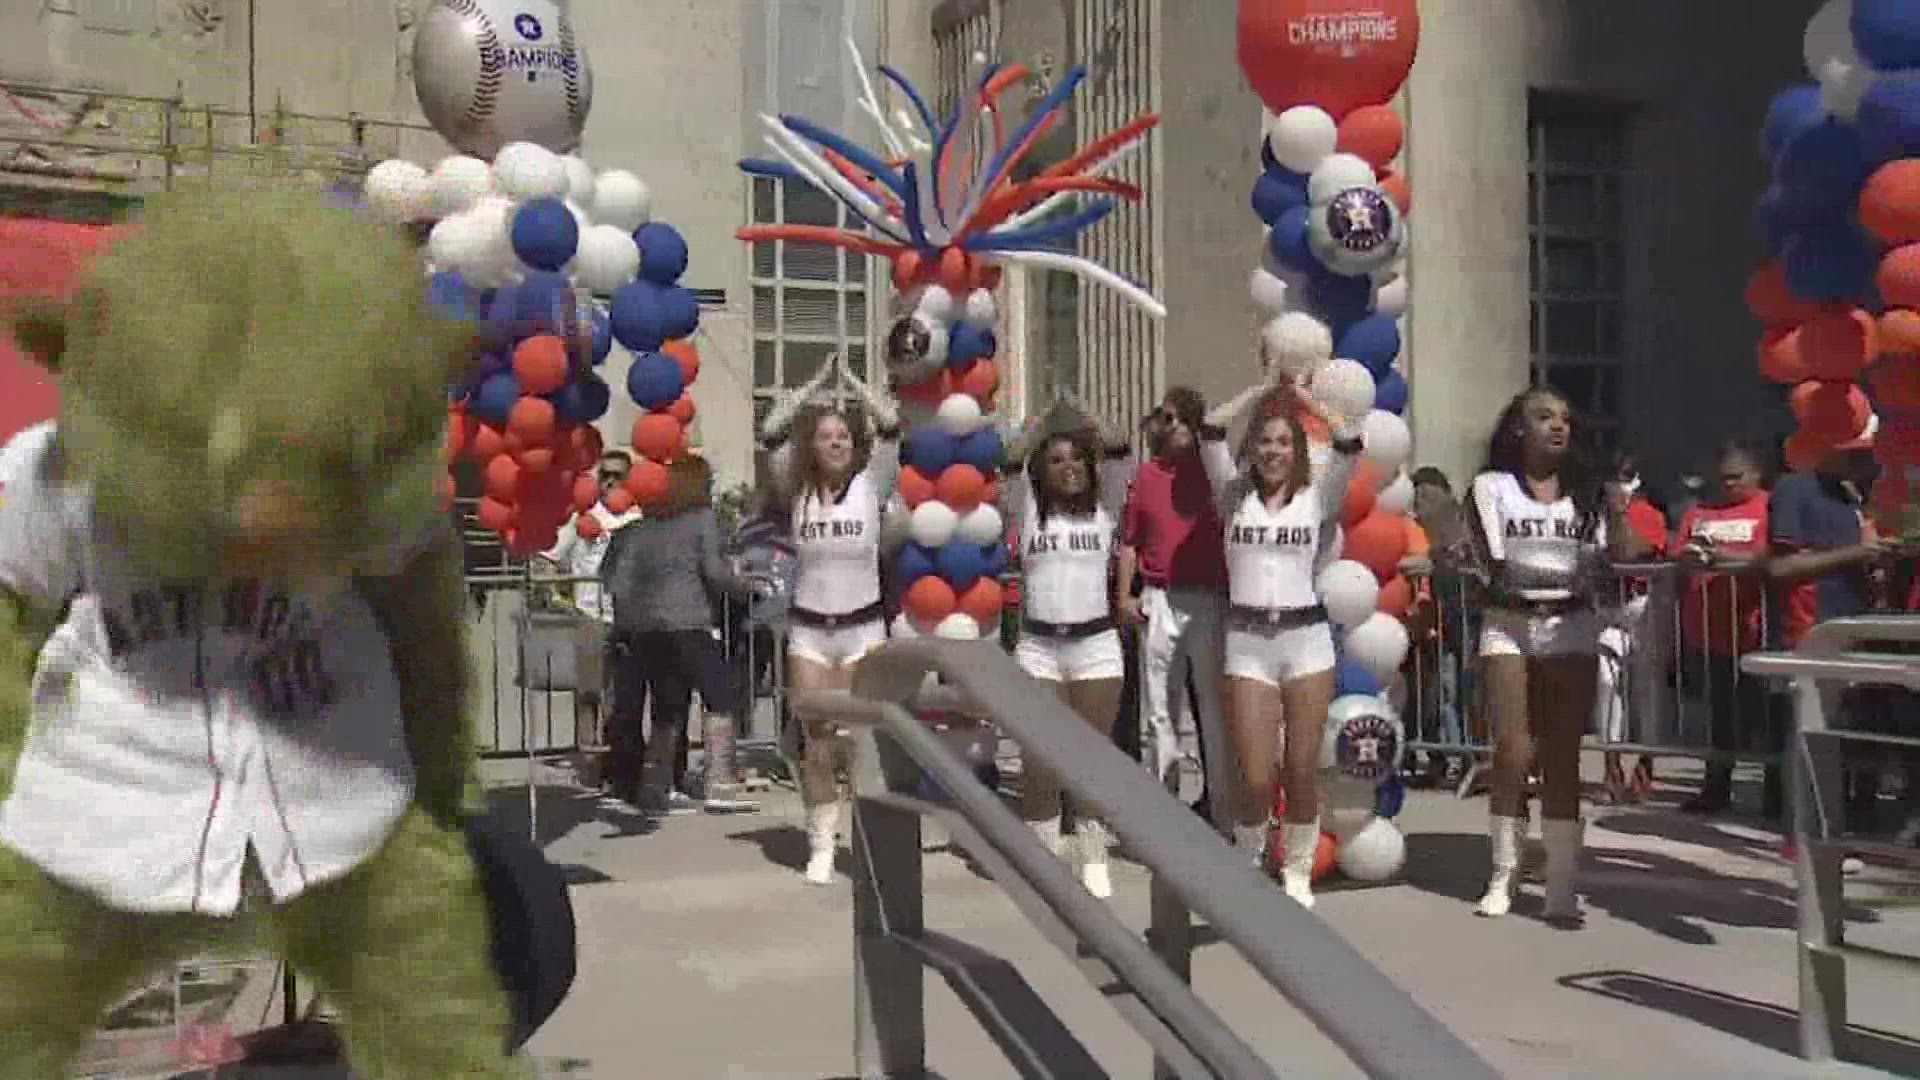 The City of Houston hosted a rally in front of City Hall to celebrate the Astros making it to the playoffs.